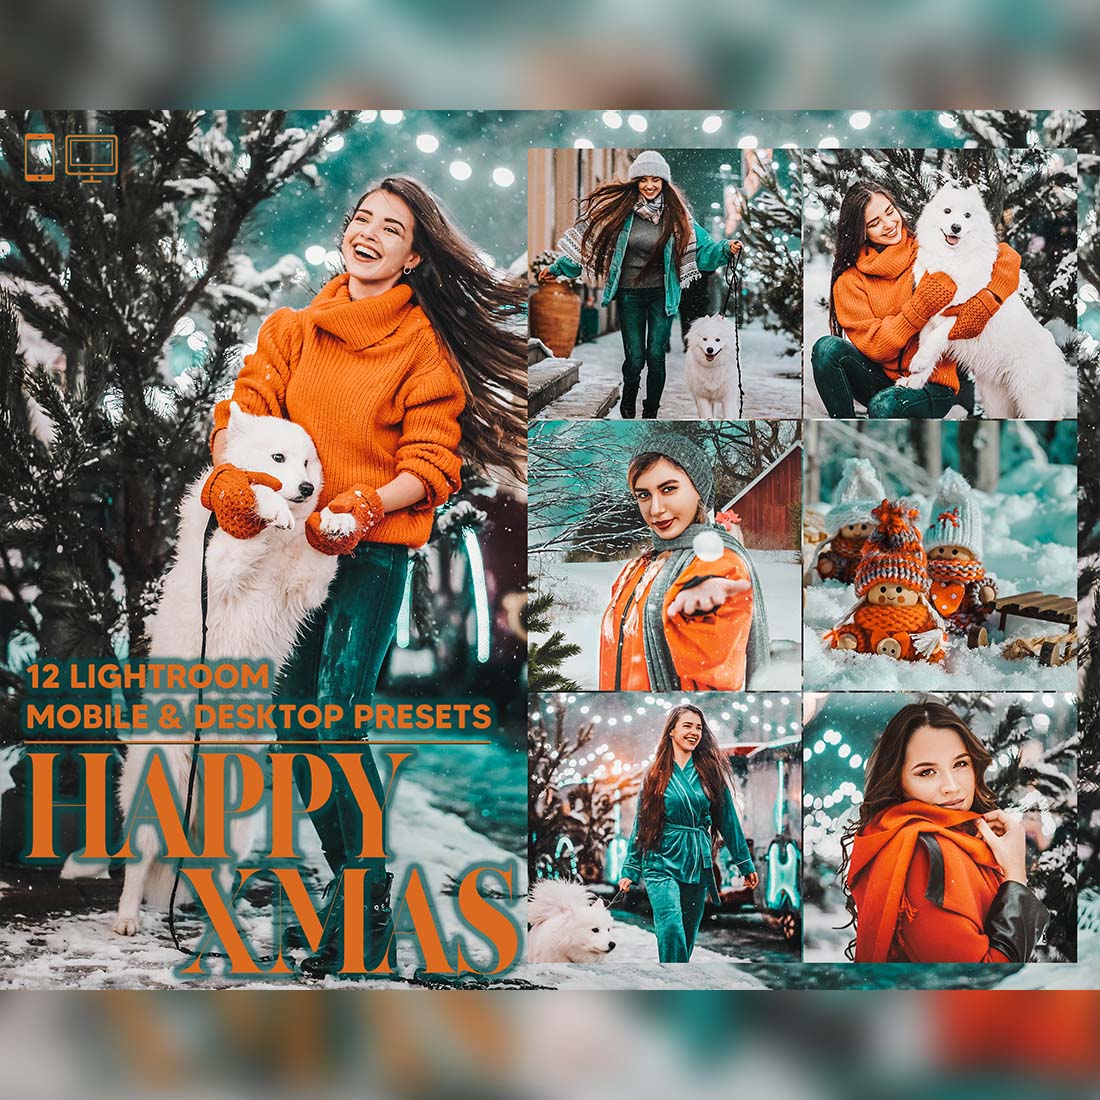 12 Christmas Lightroom Presets, Happy Xmas Mobile Preset, Holiday Desktop, Lifestyle Portrait Theme For Instagram LR Filter DNG Bright cover image.